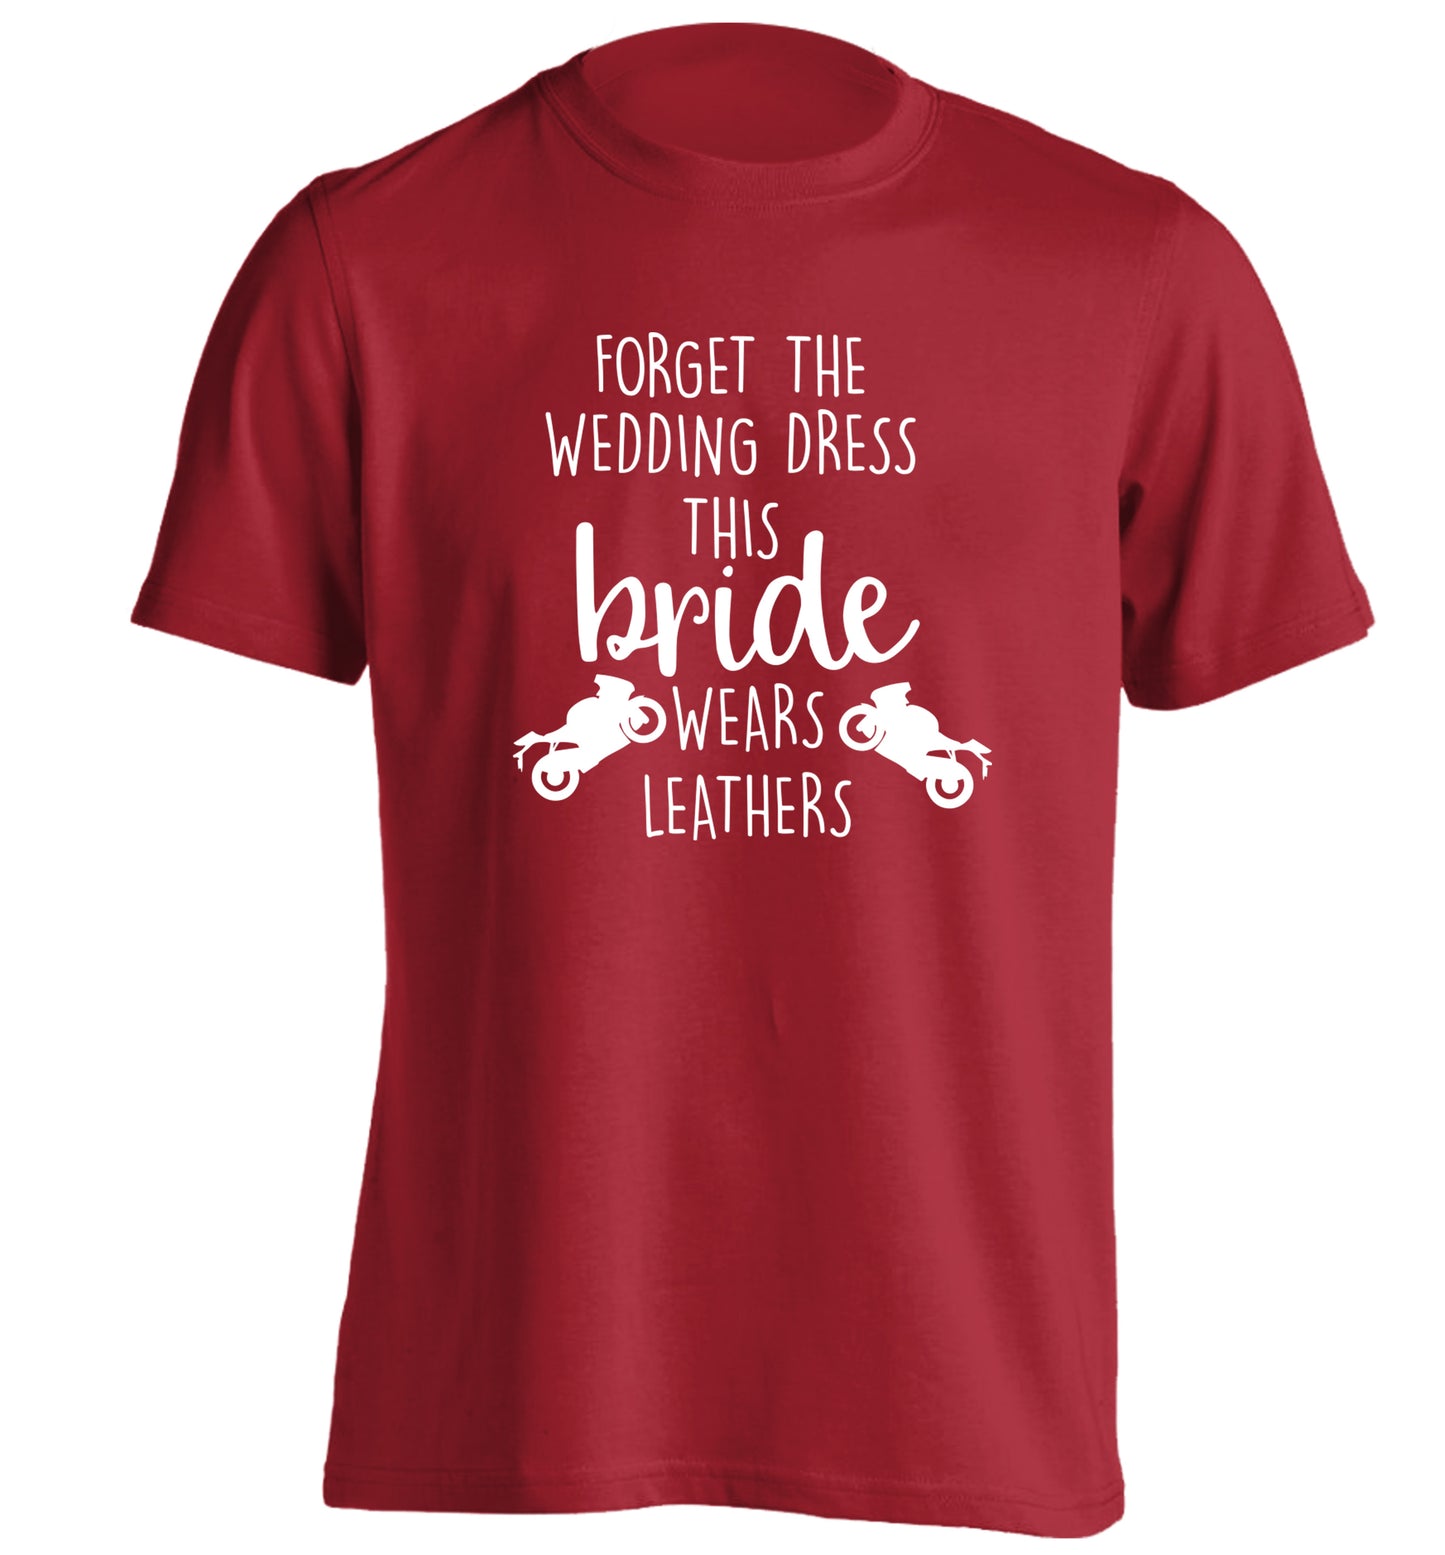 Forget the wedding dress this bride wears leathers adults unisex red Tshirt 2XL